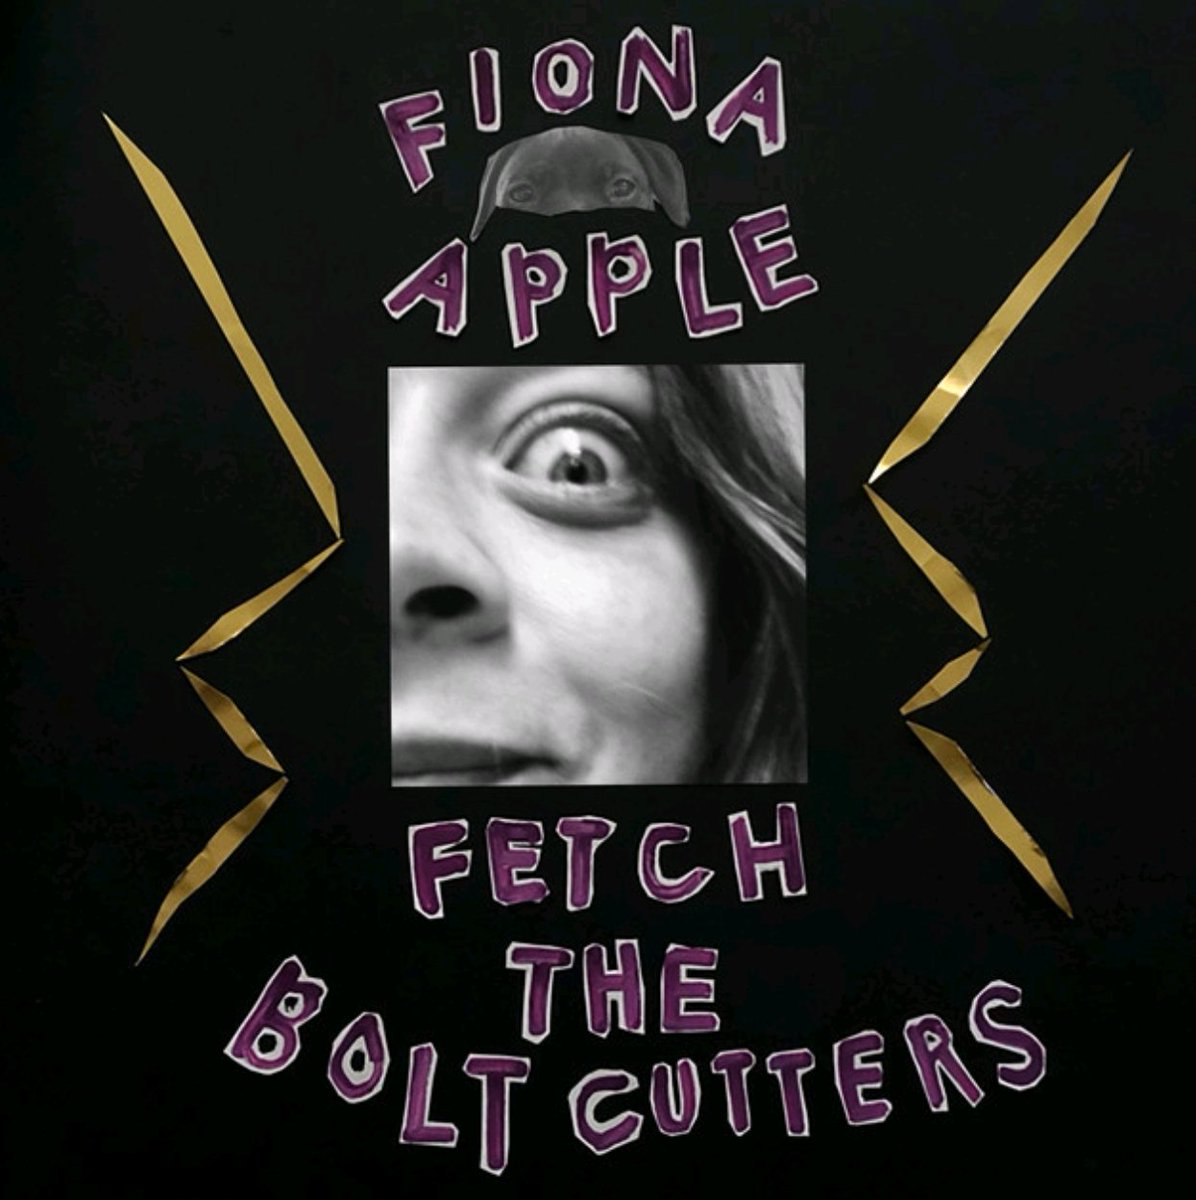 My picks for #5albums20
1 Fiona Apple- Fetch The Bolt Cutters
2 Bob Dylan- Rough & Rowdy Ways
3 The Strokes- The New Abnormal
4 Phoebe Bridgers- Punisher
5 Run The Jewels- RTJ4
(6 Flaming Lips 7 Taylor Swift folklore 8 Fontaines DC 9 Fleet Foxes 10 Róisín Murphy)
@RichardS7370